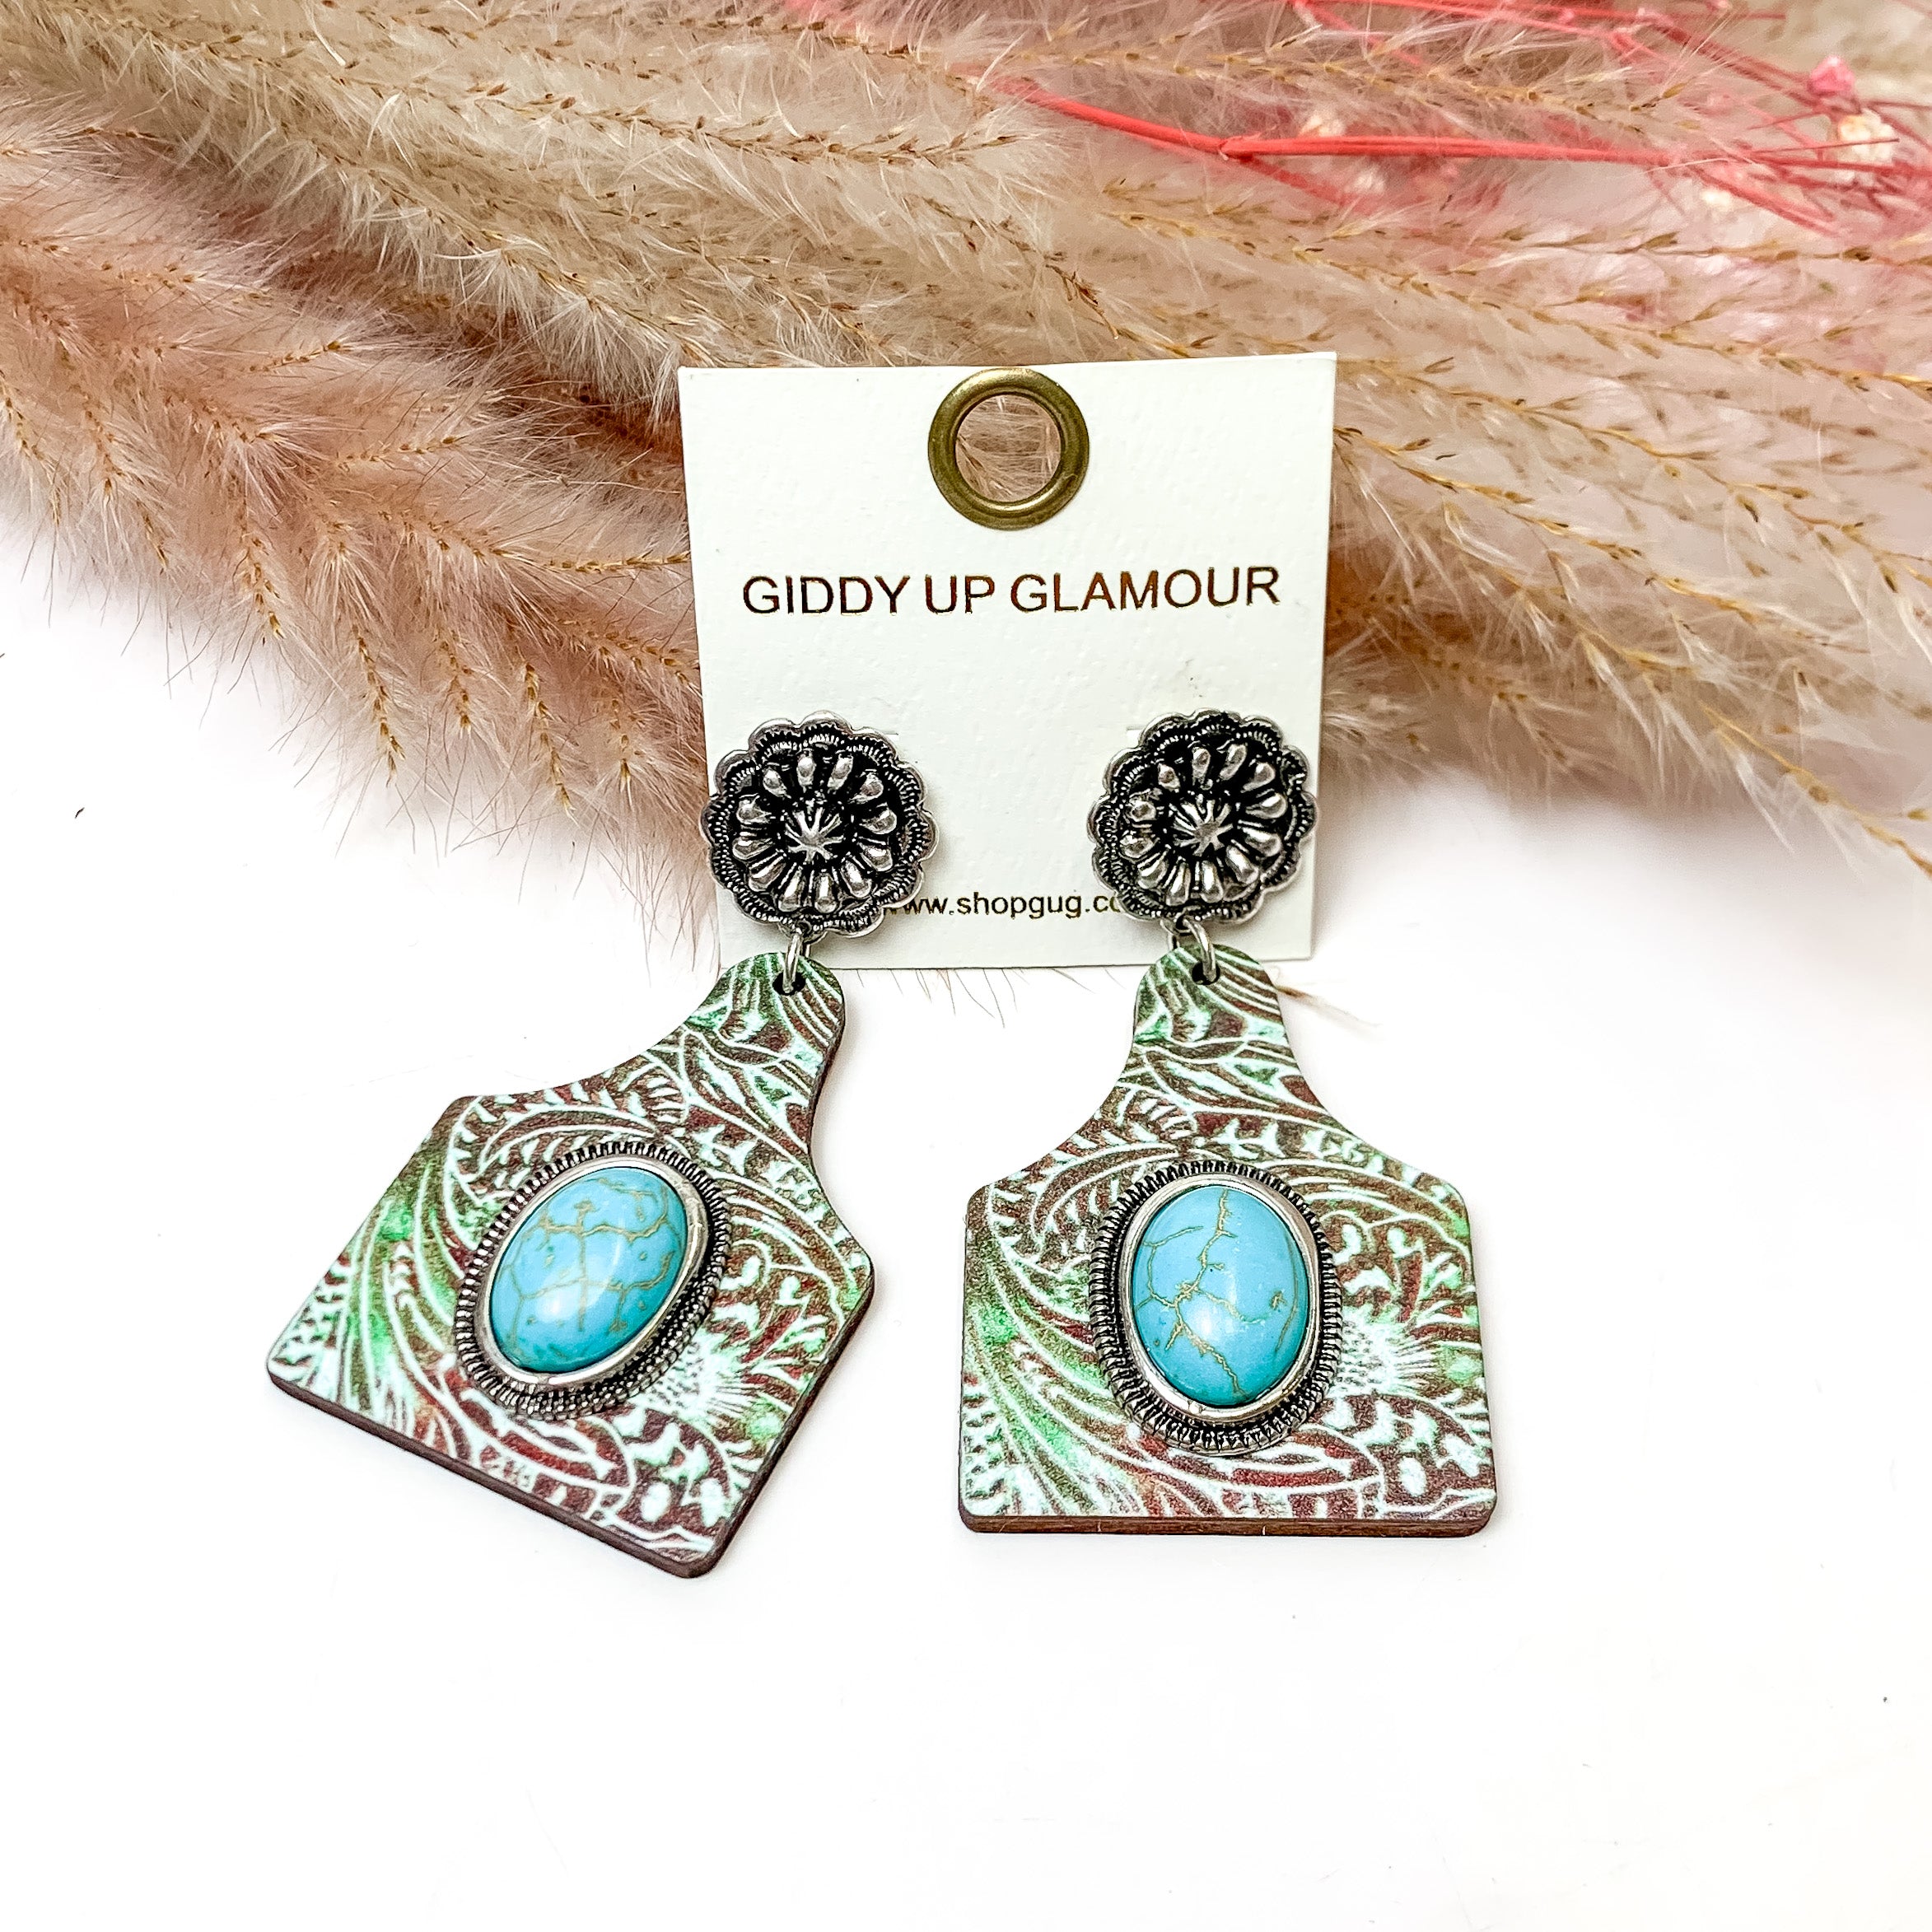 Patina Cattle Tag Earrings With Turquoise Center Stone. These earrings are pictured on a white background with flowers behind for decoration.